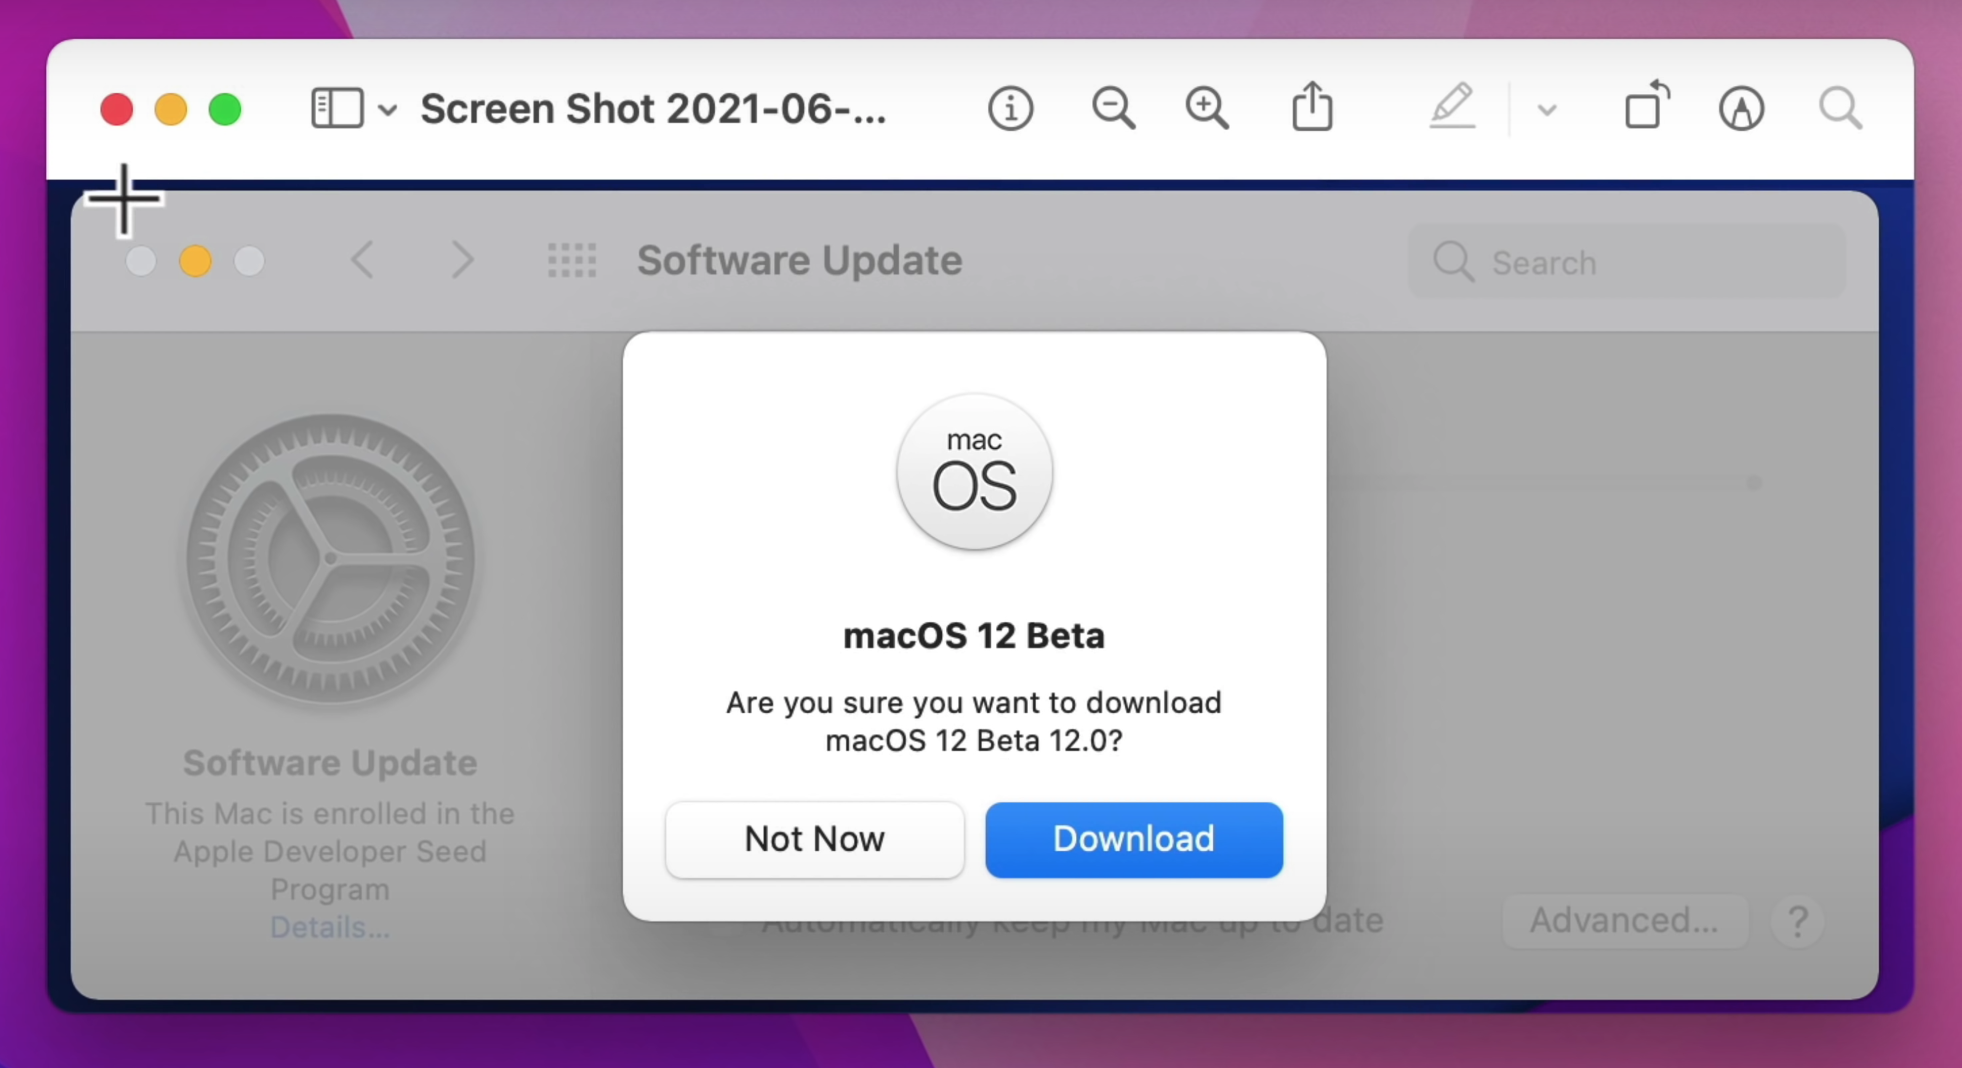 Popup window with the button to download macOS 12 beta